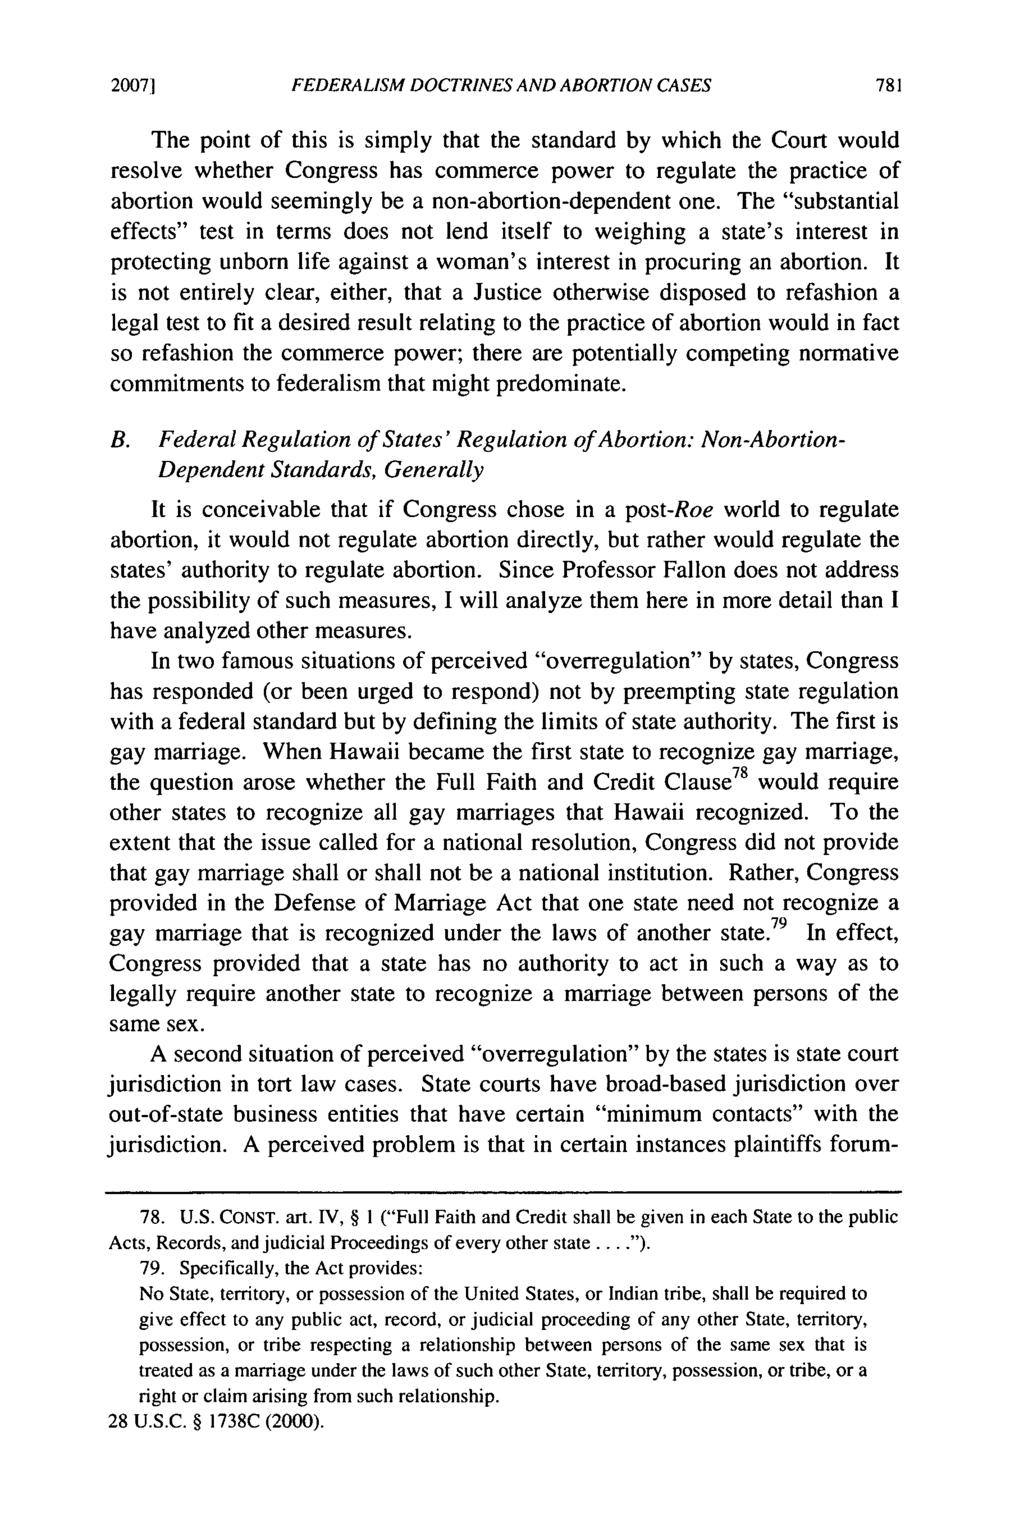 20071 FEDERALISM DOCTRINES AND ABORTION CASES The point of this is simply that the standard by which the Court would resolve whether Congress has commerce power to regulate the practice of abortion